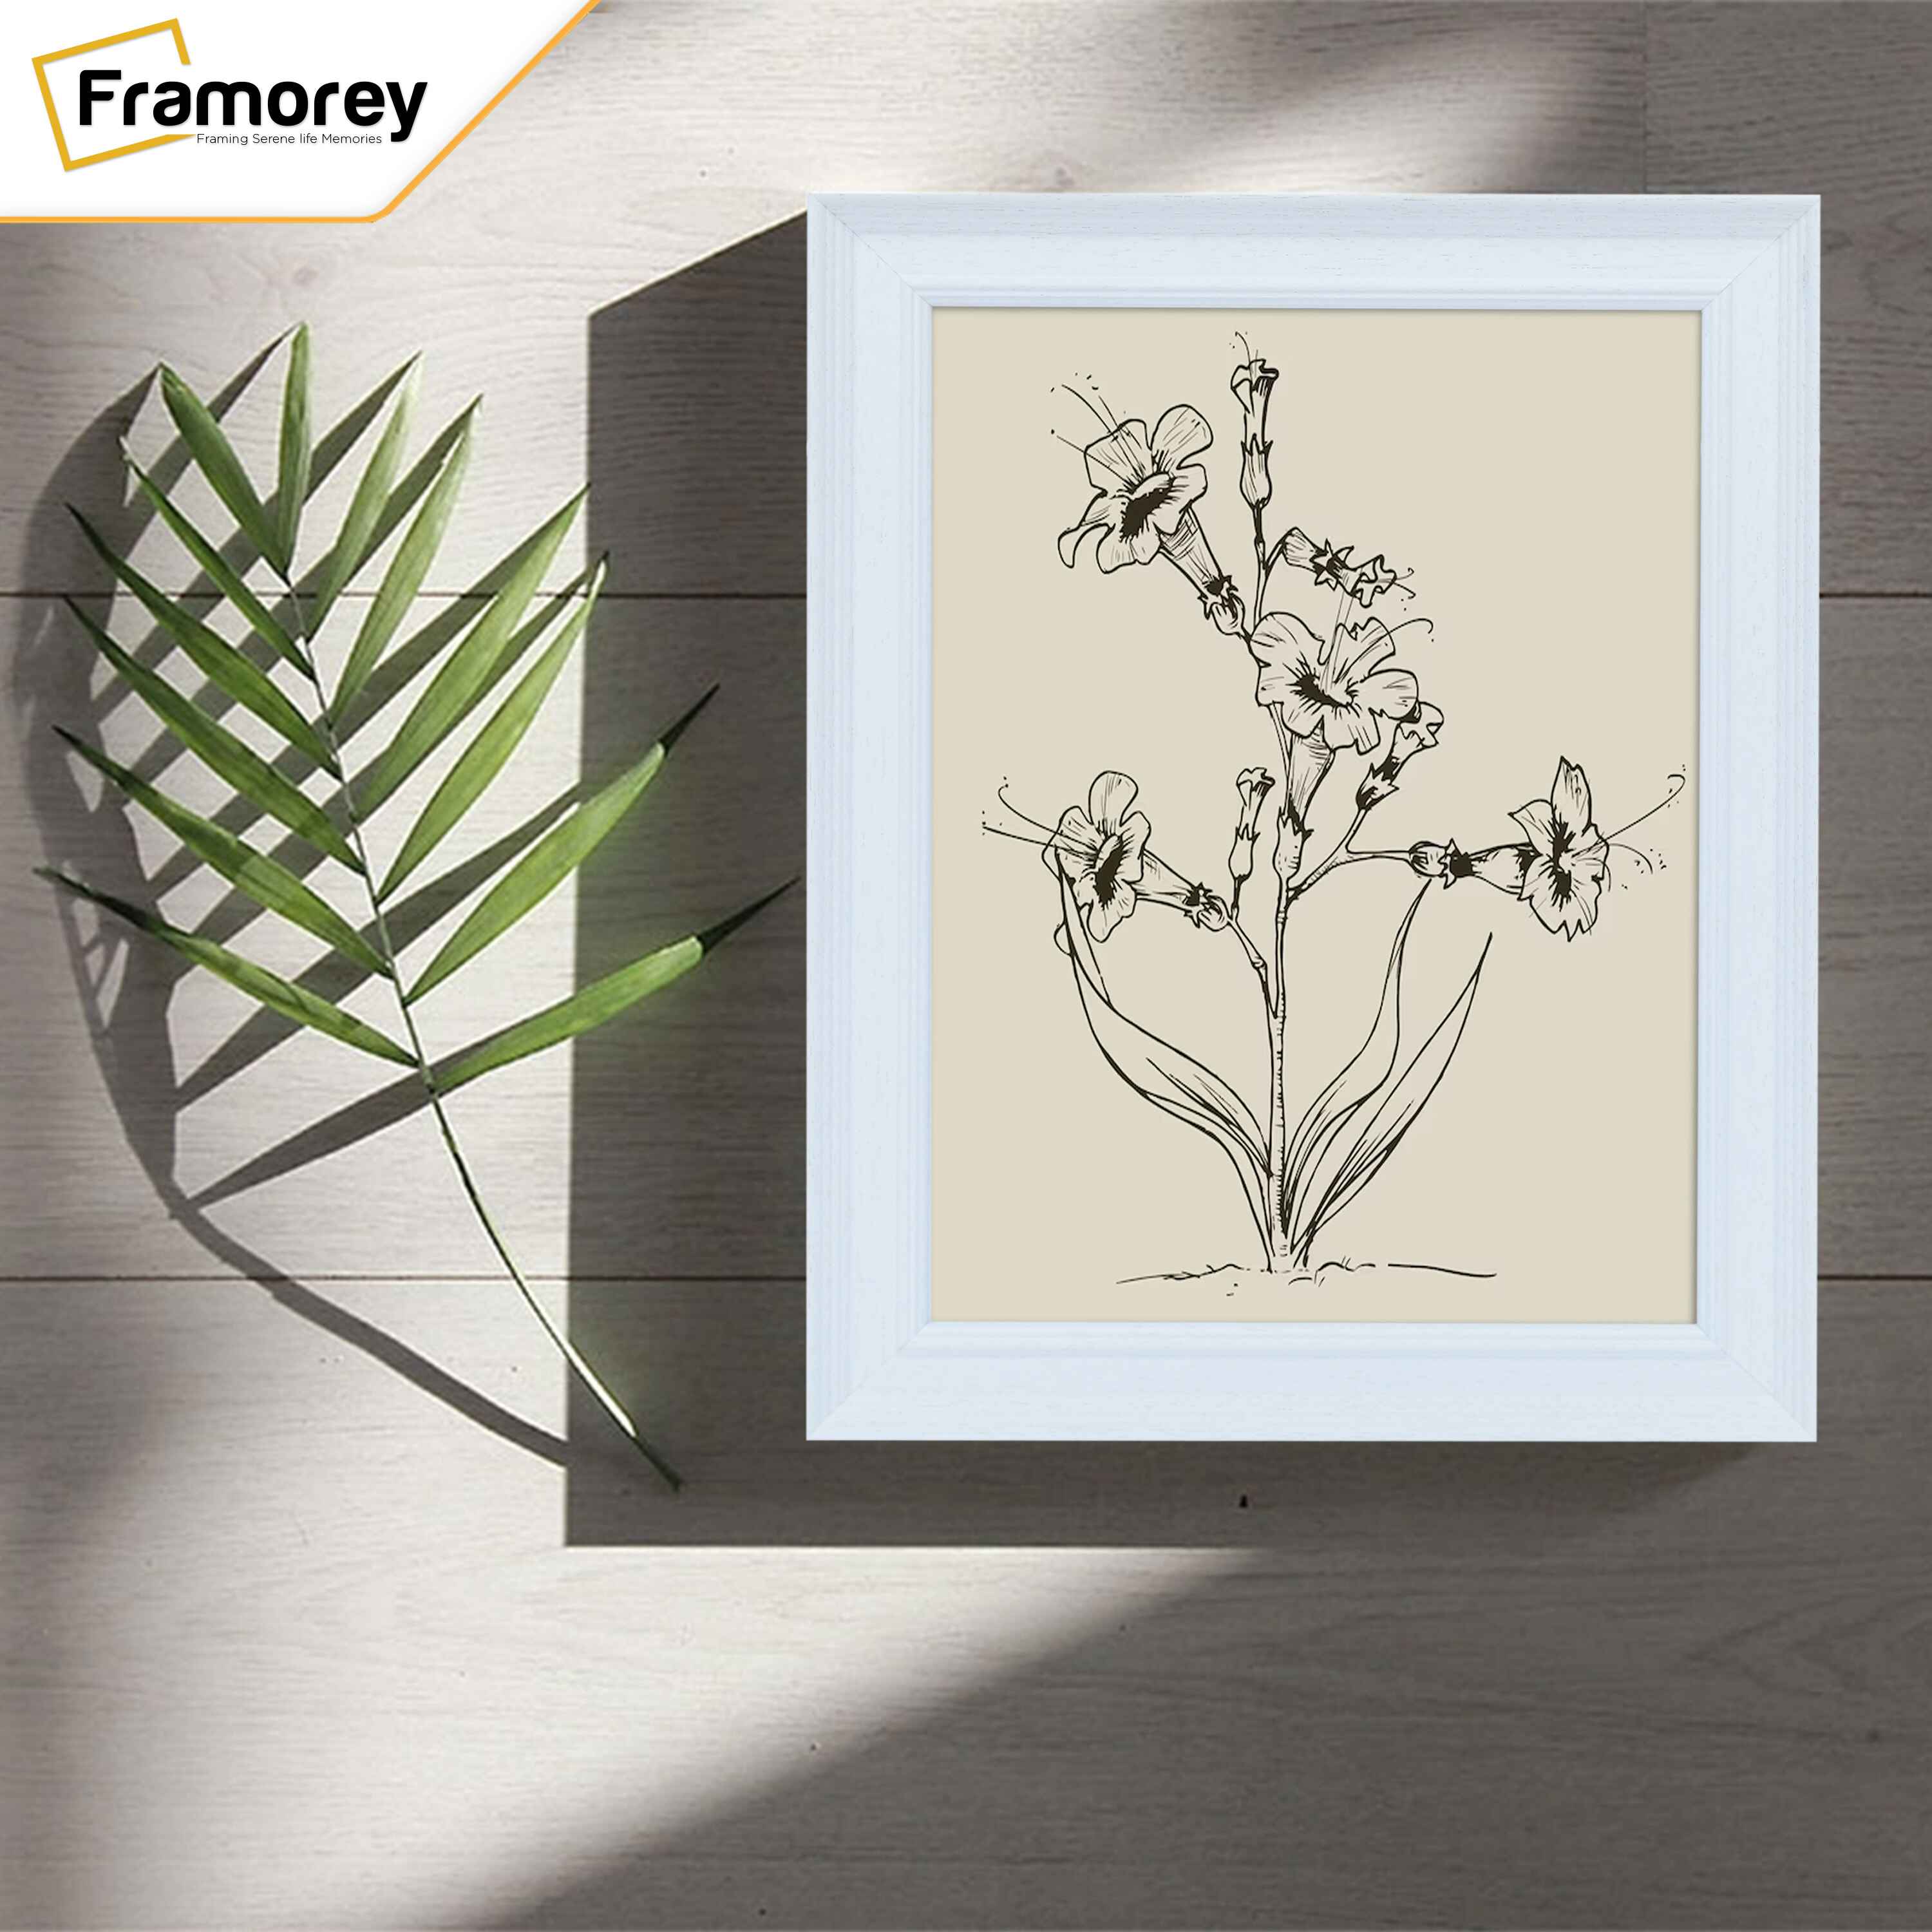 Grained White Picture Frame Photo Frame Fletcher Wood Wall Art Frame